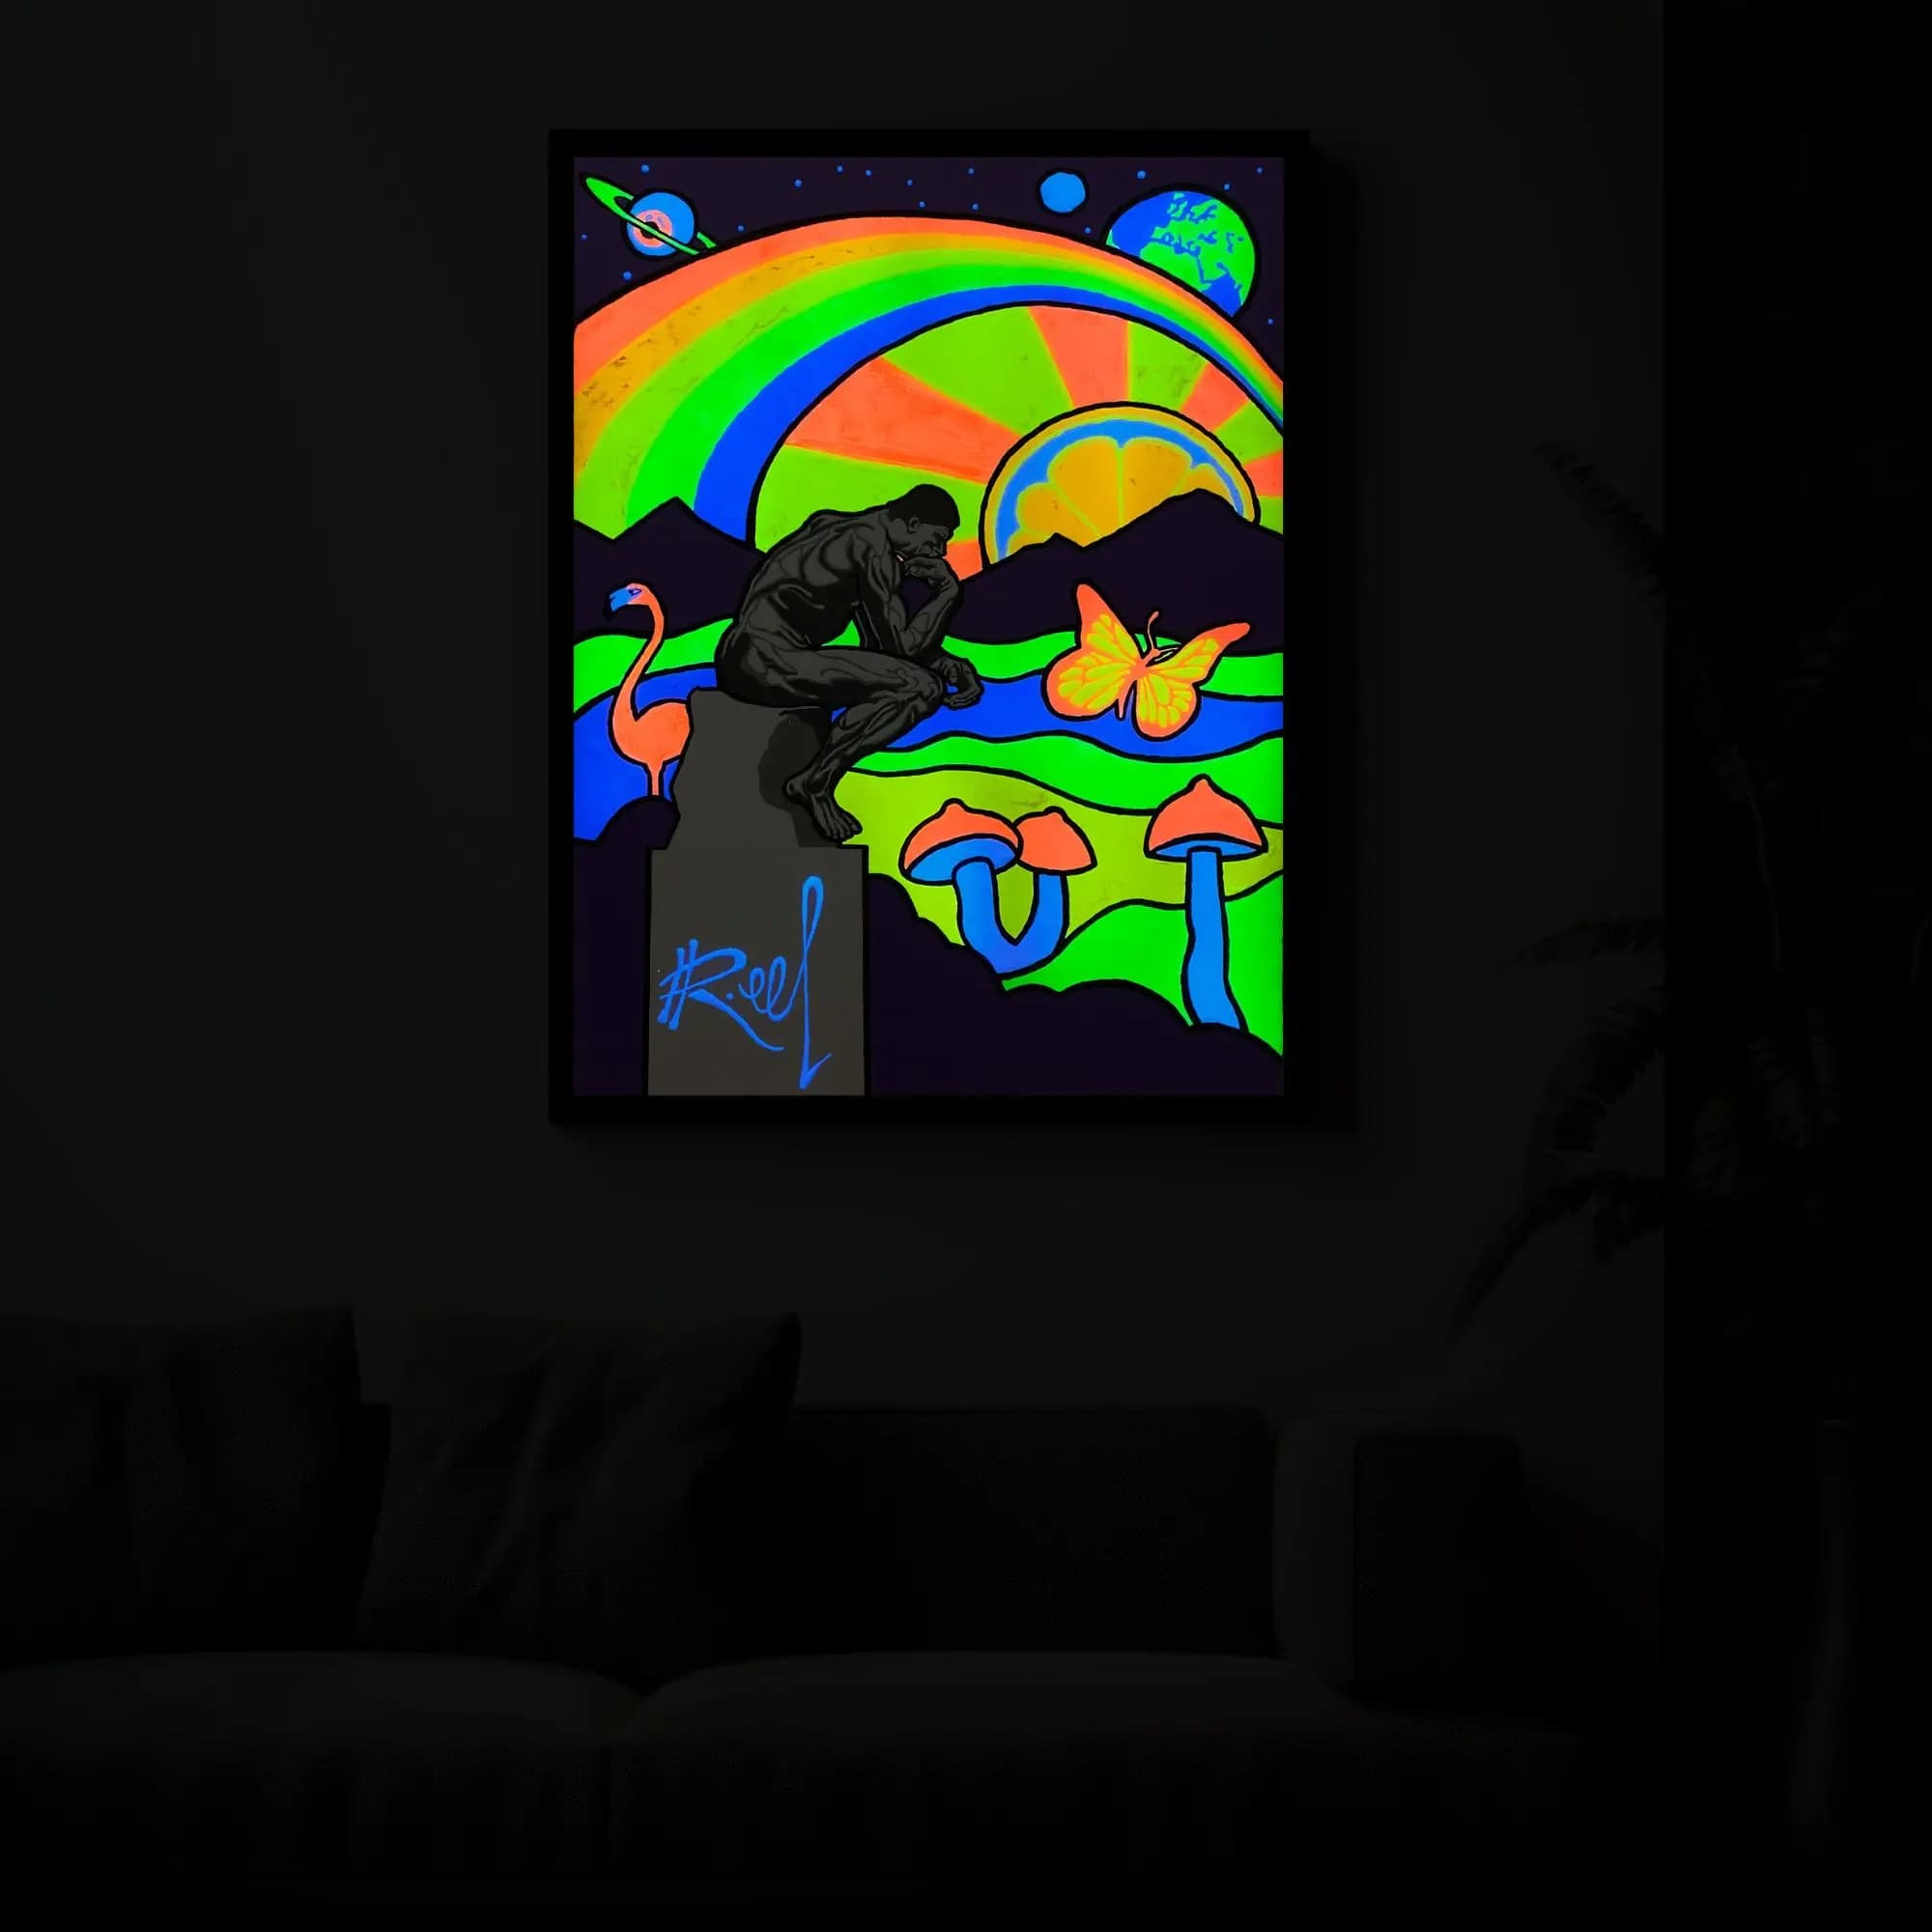 50x70cm Canvas Art Above Sofa - Night Glow in the Dark: The Thinker - Witness its captivating transformation.